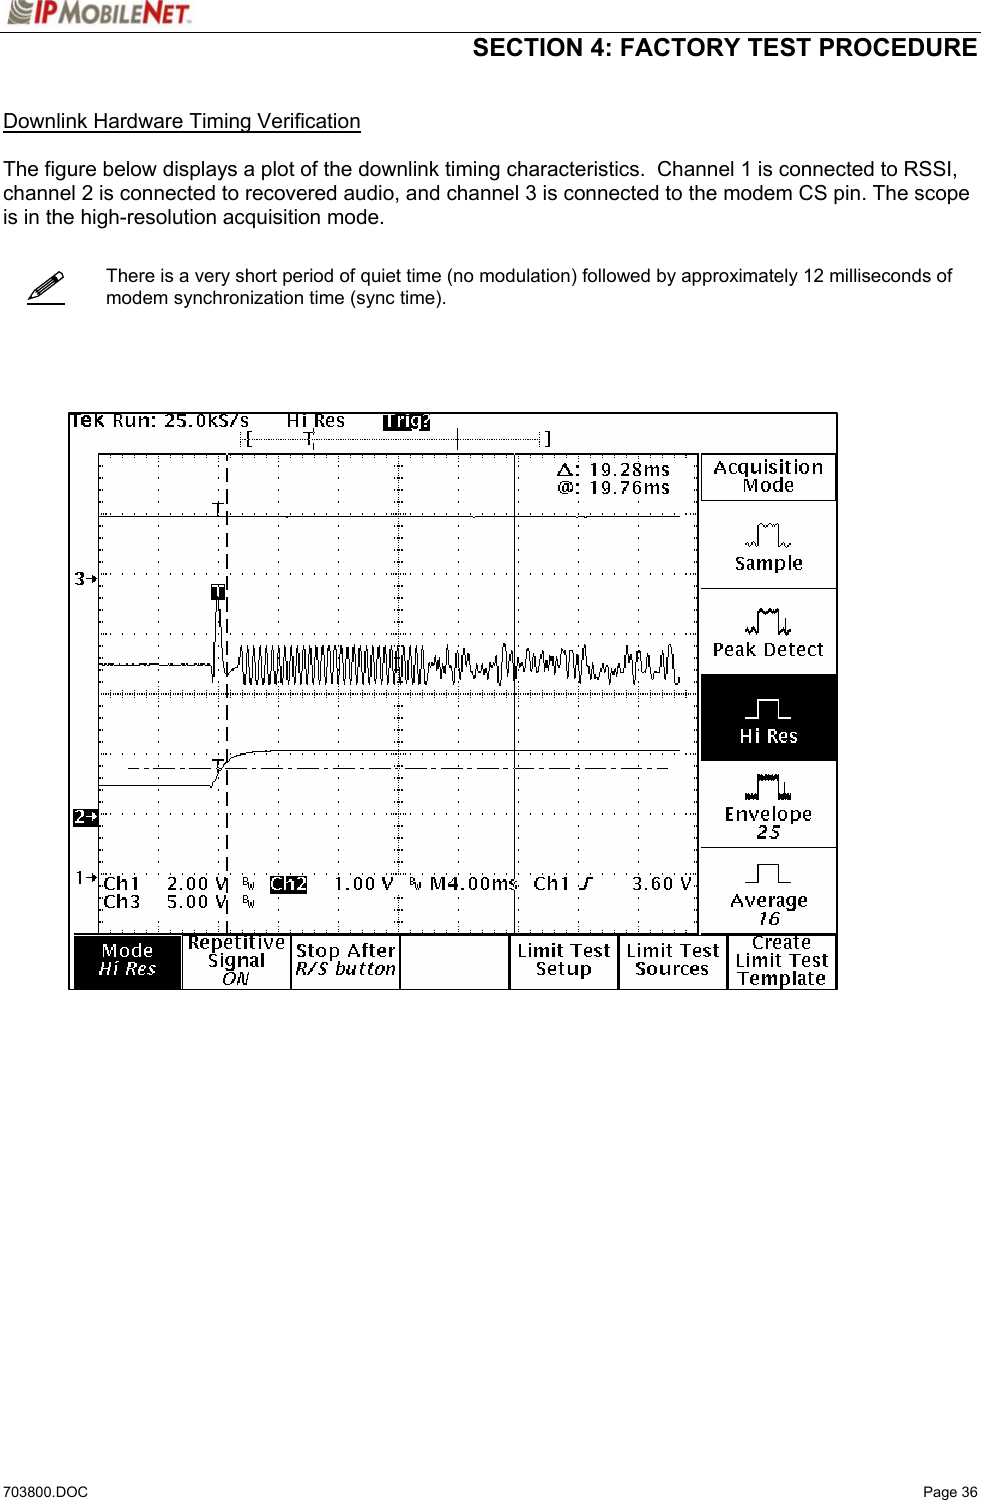  SECTION 4: FACTORY TEST PROCEDURE  703800.DOC   Page 36    Downlink Hardware Timing Verification  The figure below displays a plot of the downlink timing characteristics.  Channel 1 is connected to RSSI, channel 2 is connected to recovered audio, and channel 3 is connected to the modem CS pin. The scope is in the high-resolution acquisition mode.      There is a very short period of quiet time (no modulation) followed by approximately 12 milliseconds of modem synchronization time (sync time).          